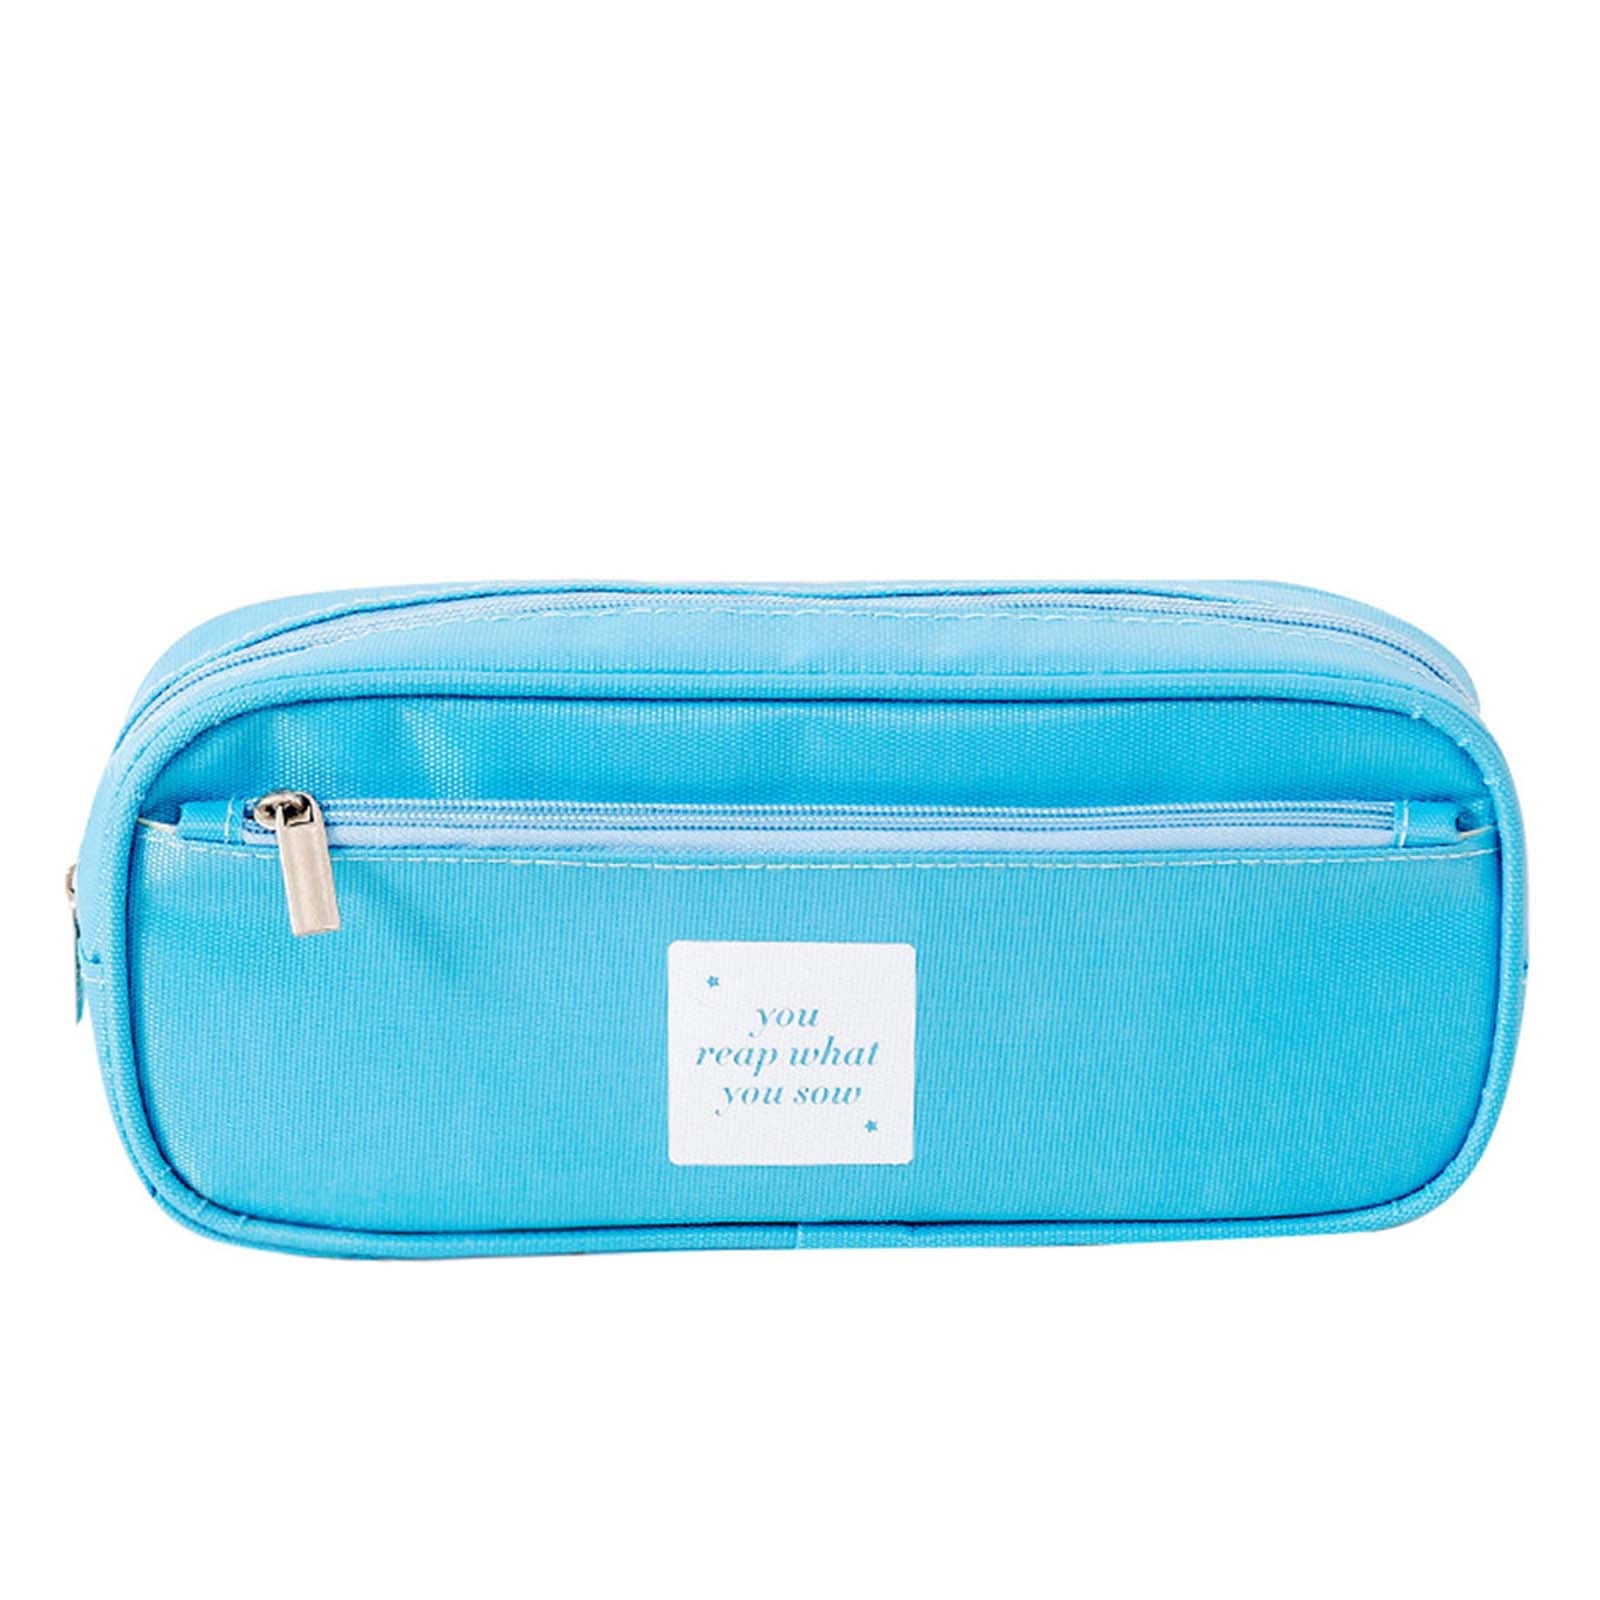 Stationery Pal Multi-functional Dual-Zippered Pencil Case - Sky Blue